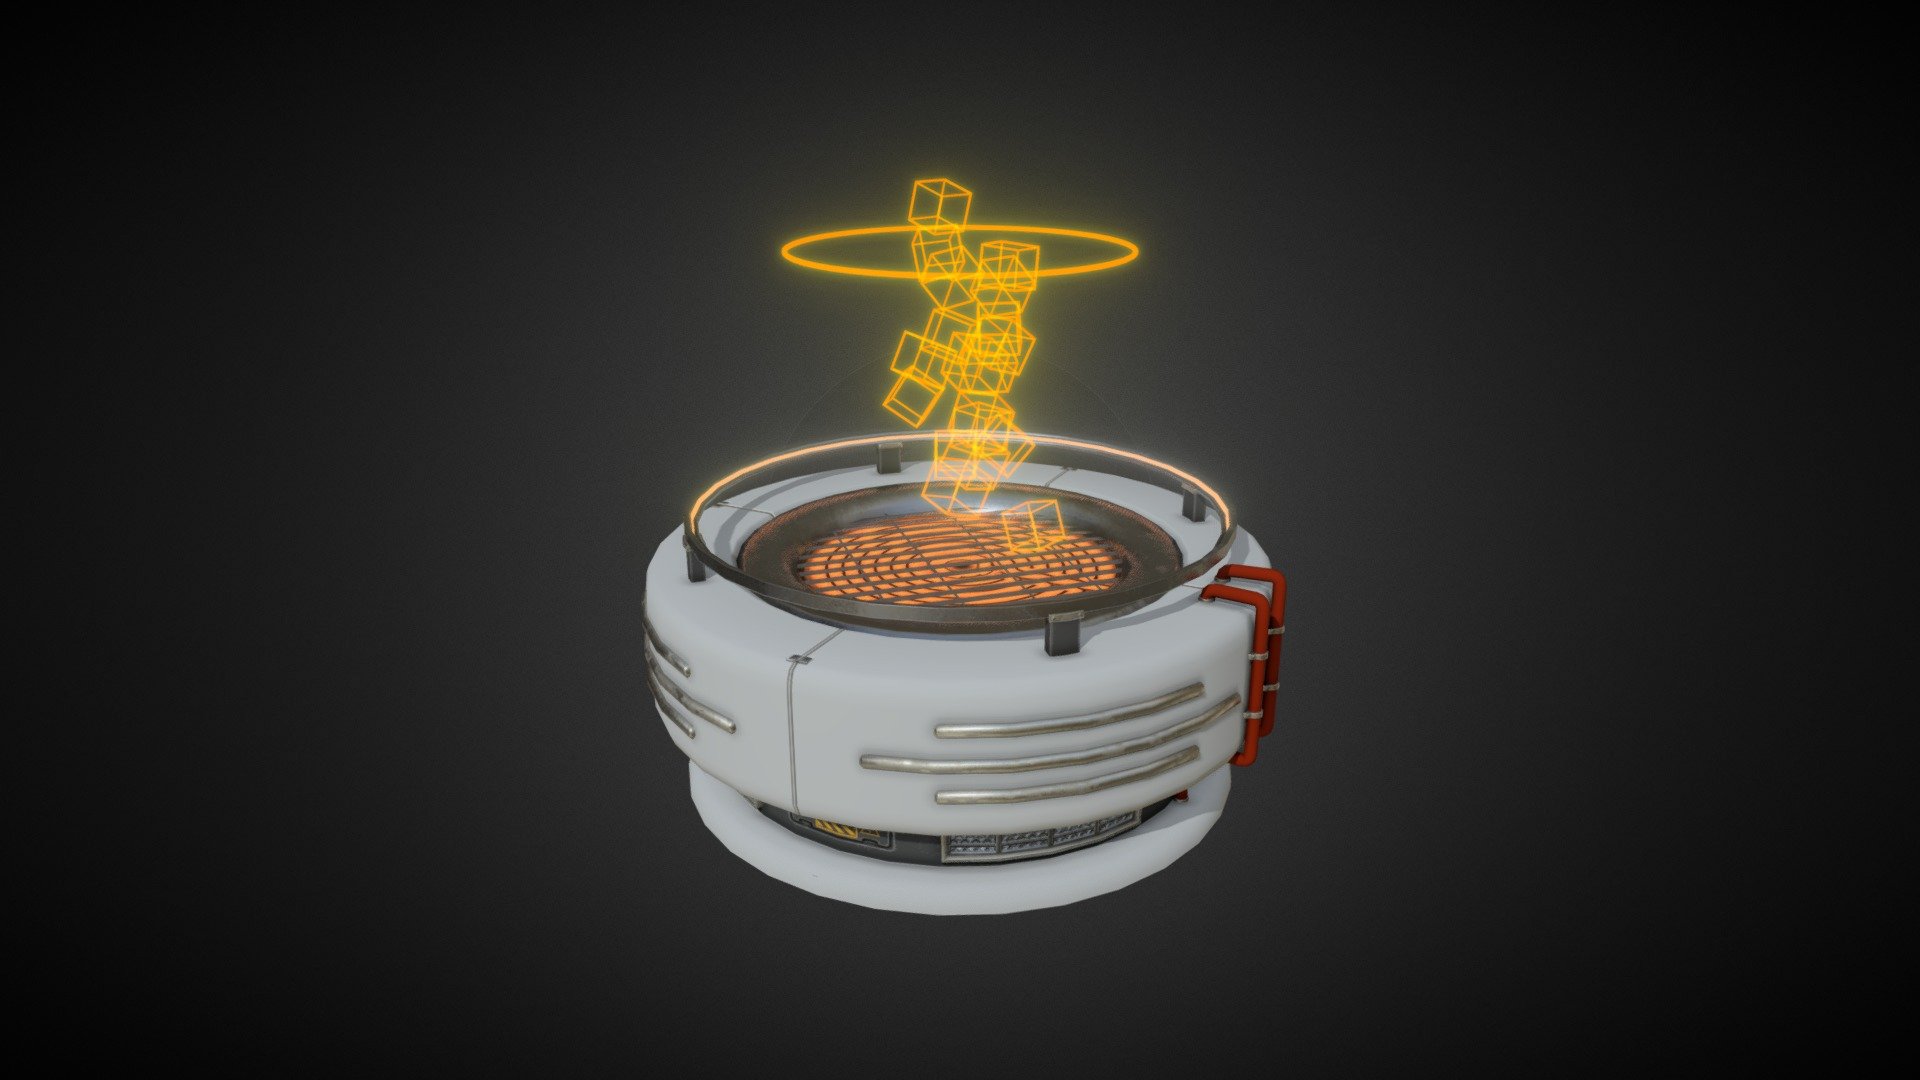 This is a scifi holographic fireplace/space heater of my own design. I was inspired by the propane space heaters commonly found in public spaces such as outdoor resturaunt seating areas. I imagined what it would be like to have an electric heater that still had the visual impact of fire fixtures.

The particles and modeling were done in blender, the texture in Substance Painter.

The triangle count without the baked particles here in sketchfab is 4808 3d model